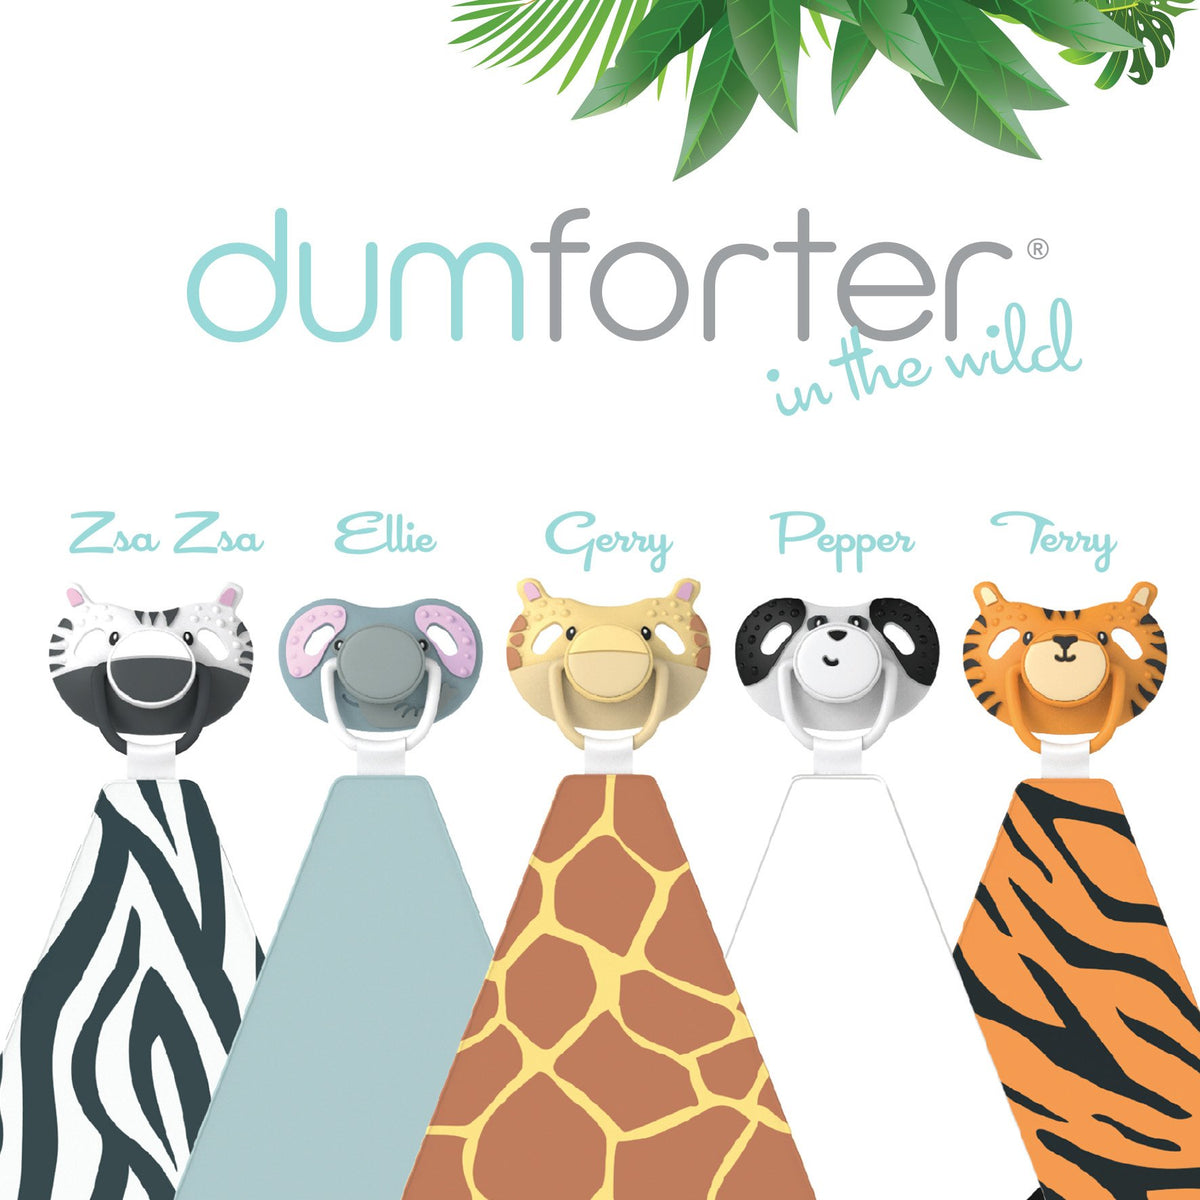 dumforter-dummy-and-comforter-terry-tiger- (7)